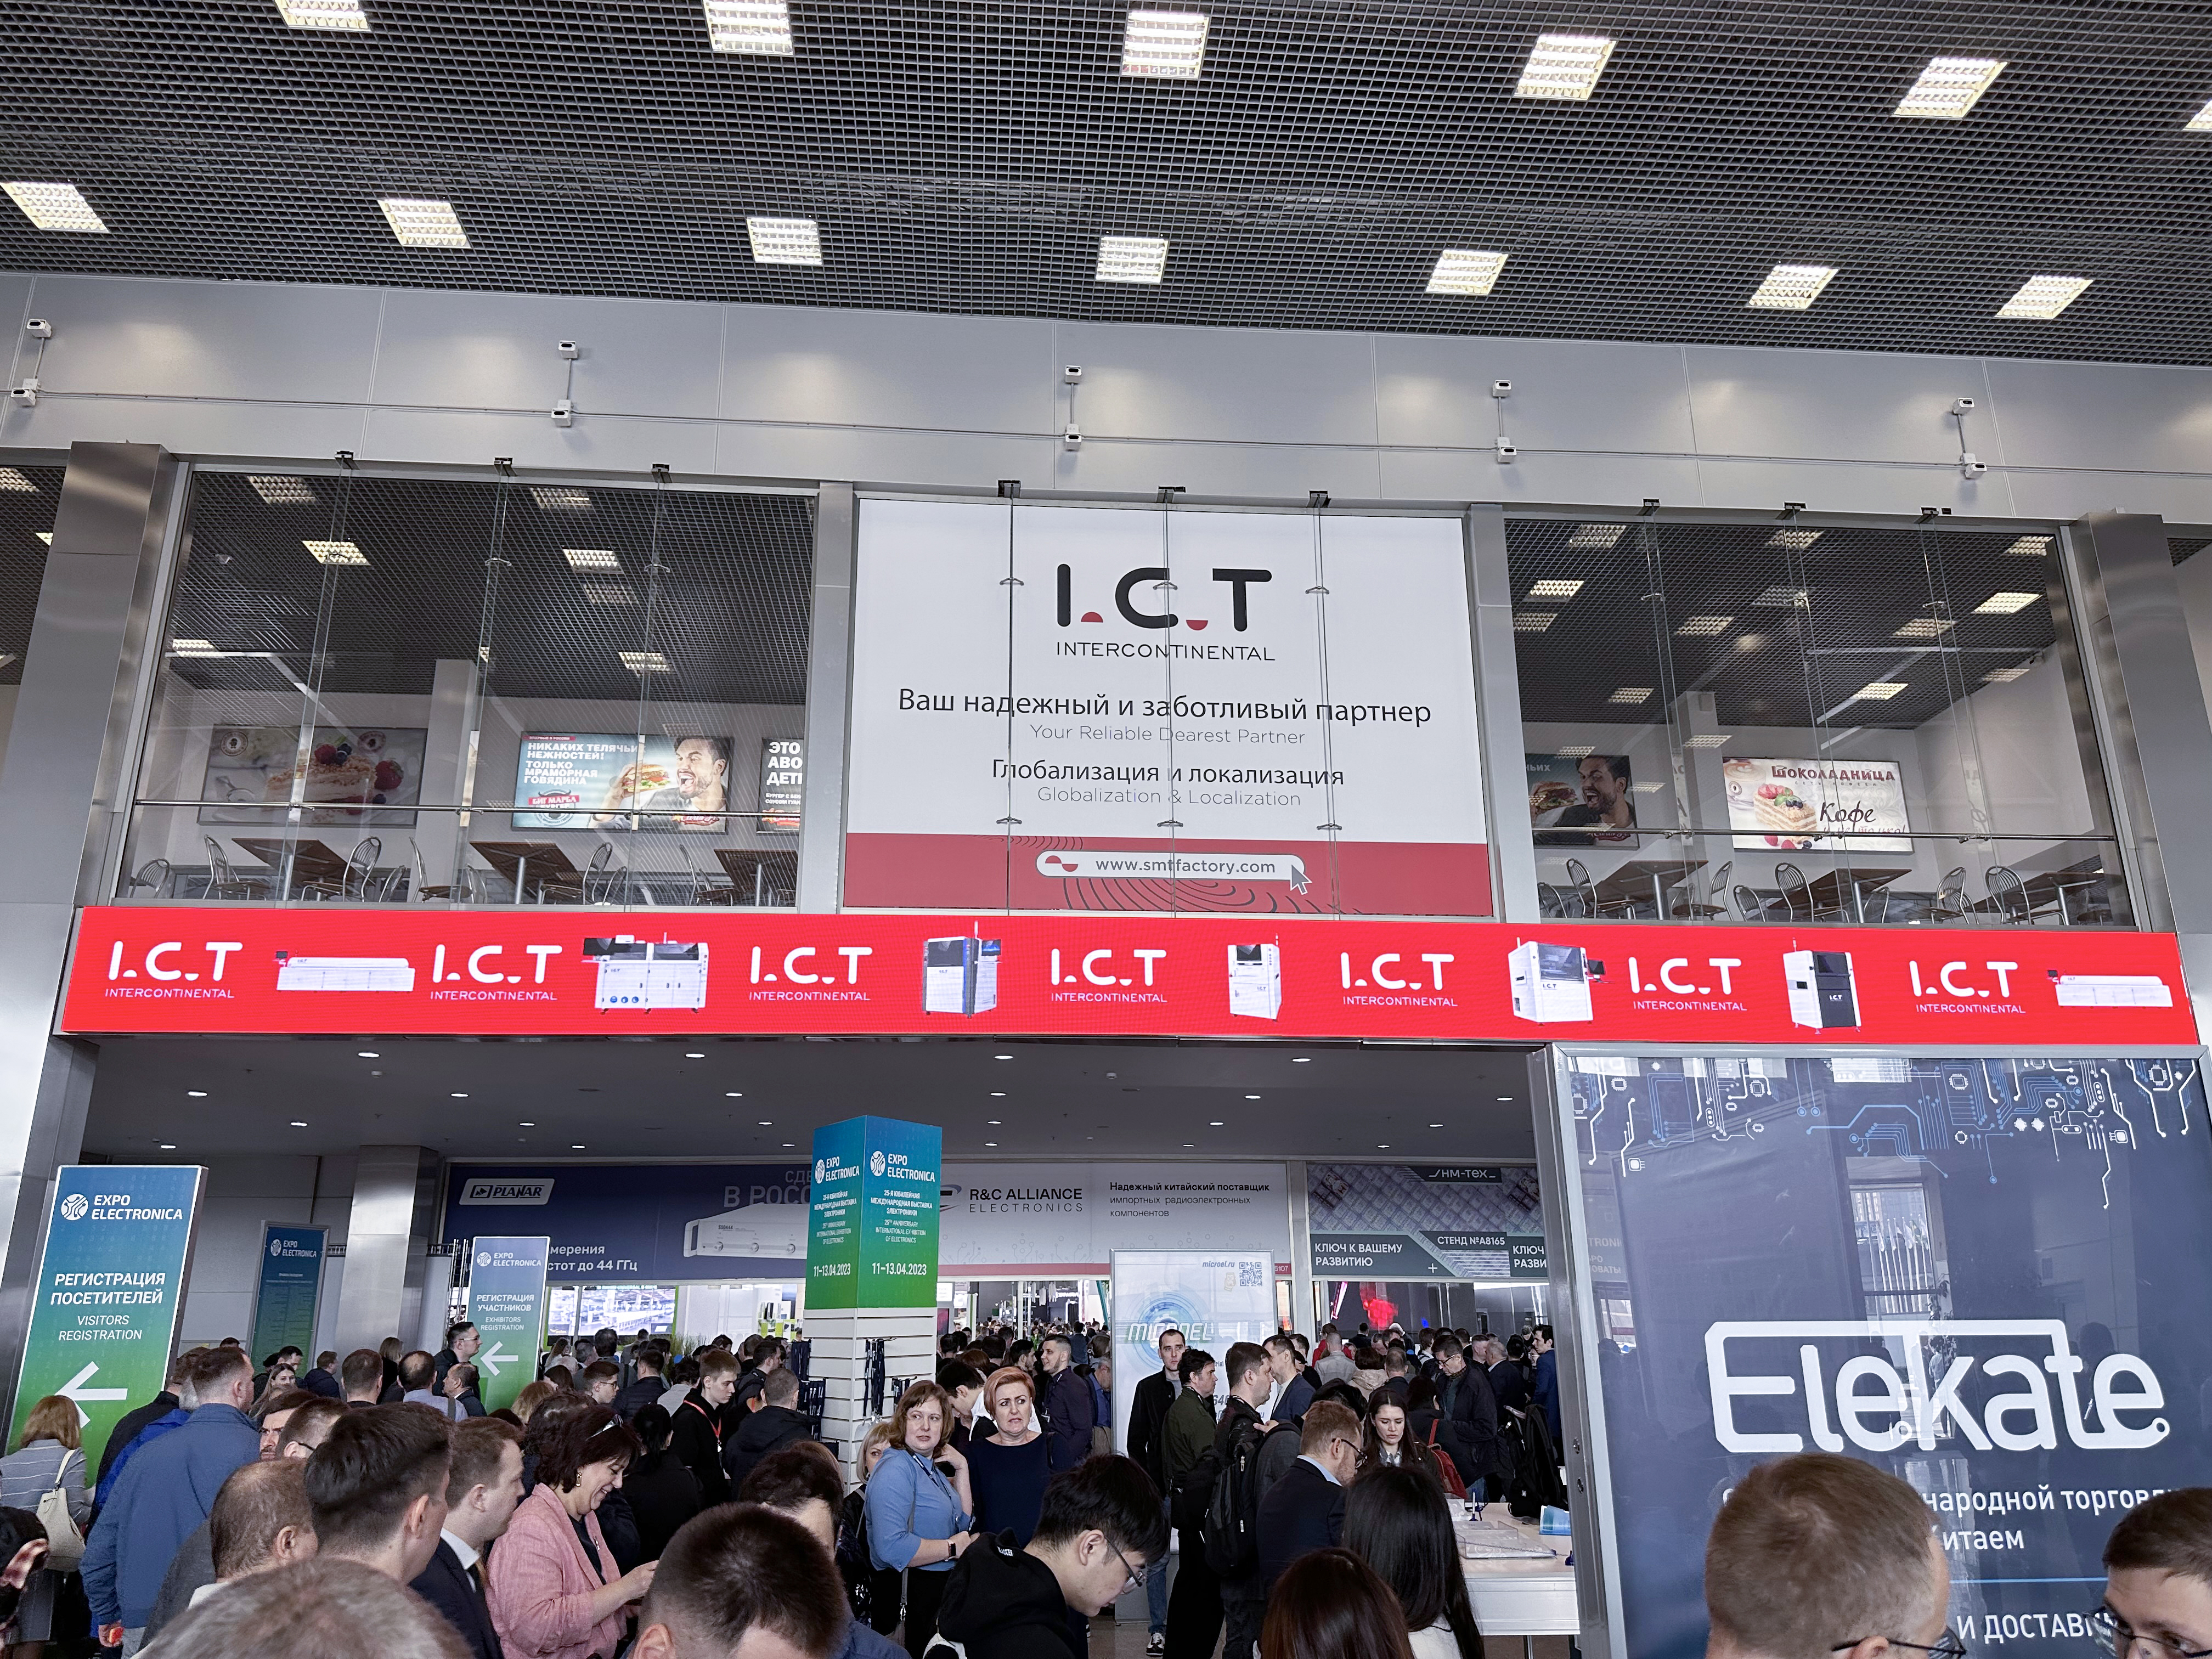 I.C.T at The ExpoElectronica Exhibition in Moscow (9)